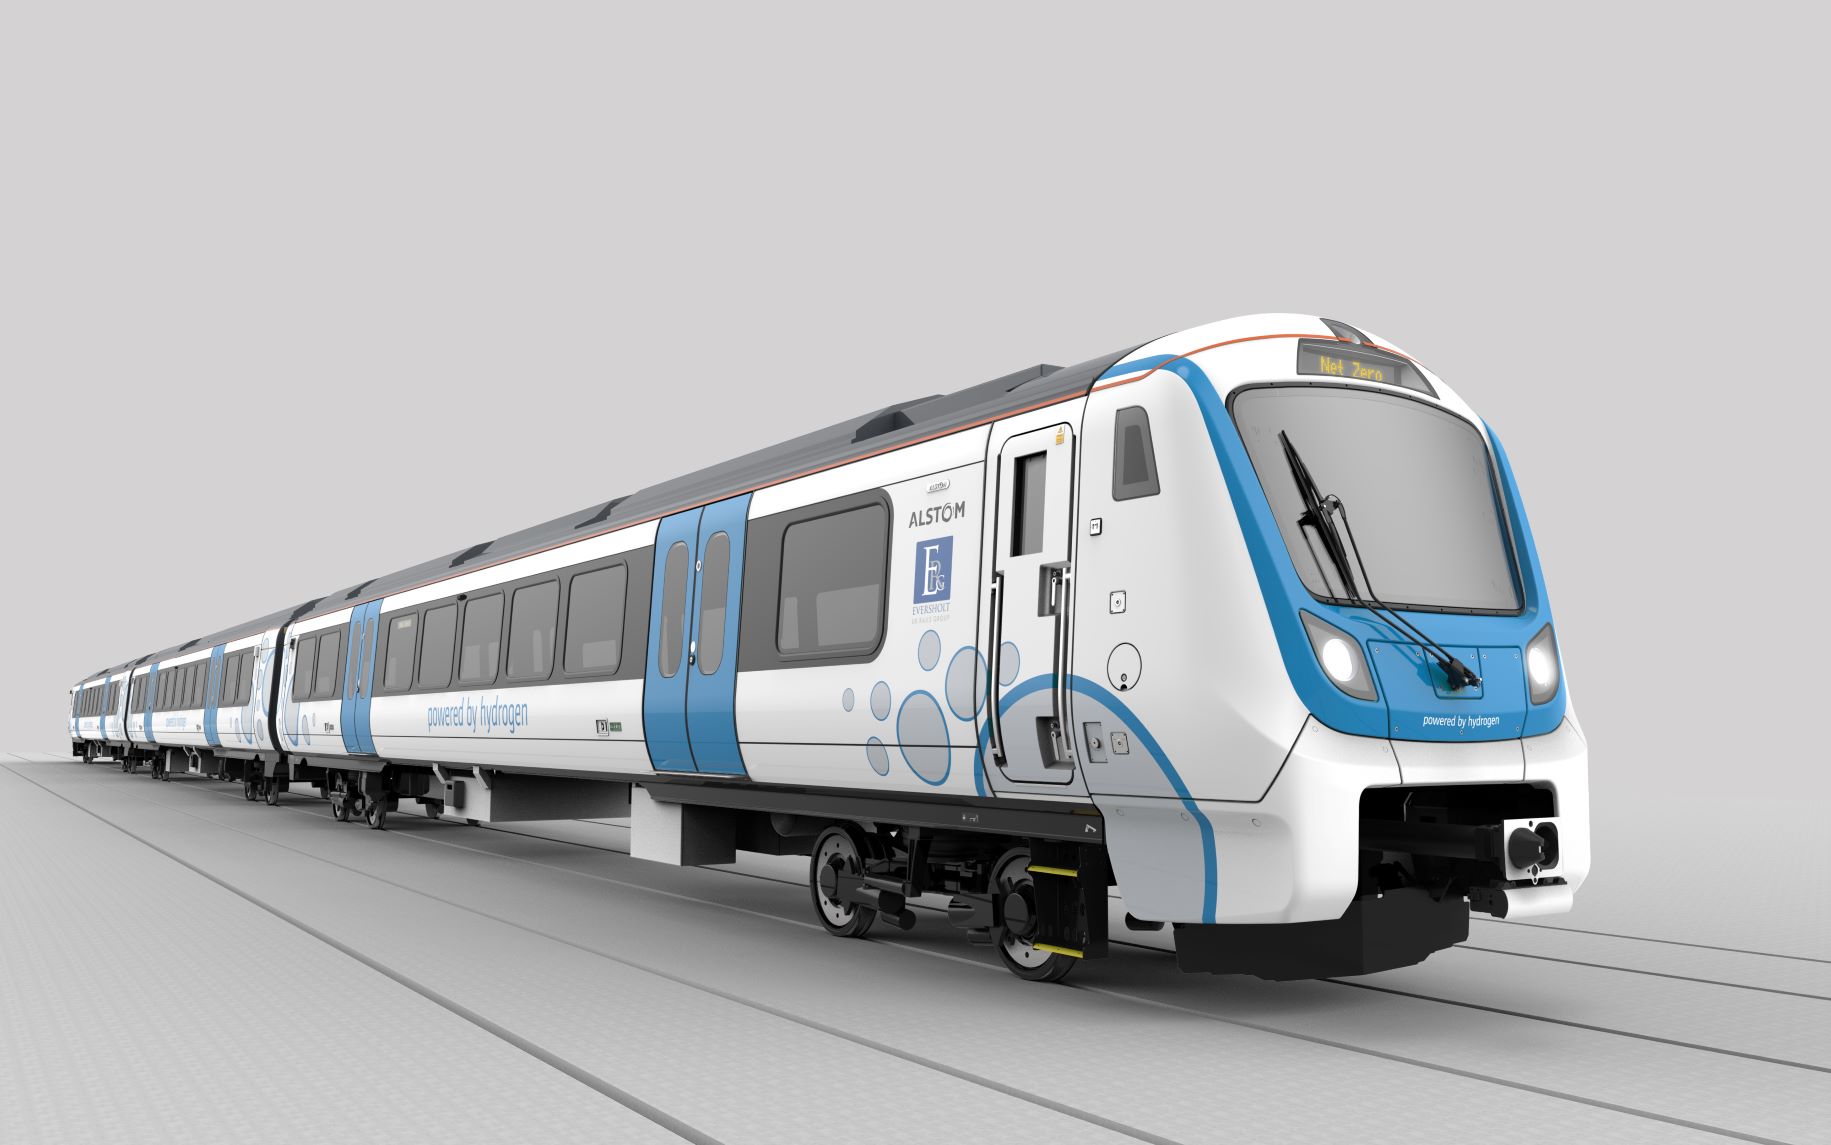 UK’s first ever brand-new hydrogen train fleet yet to come